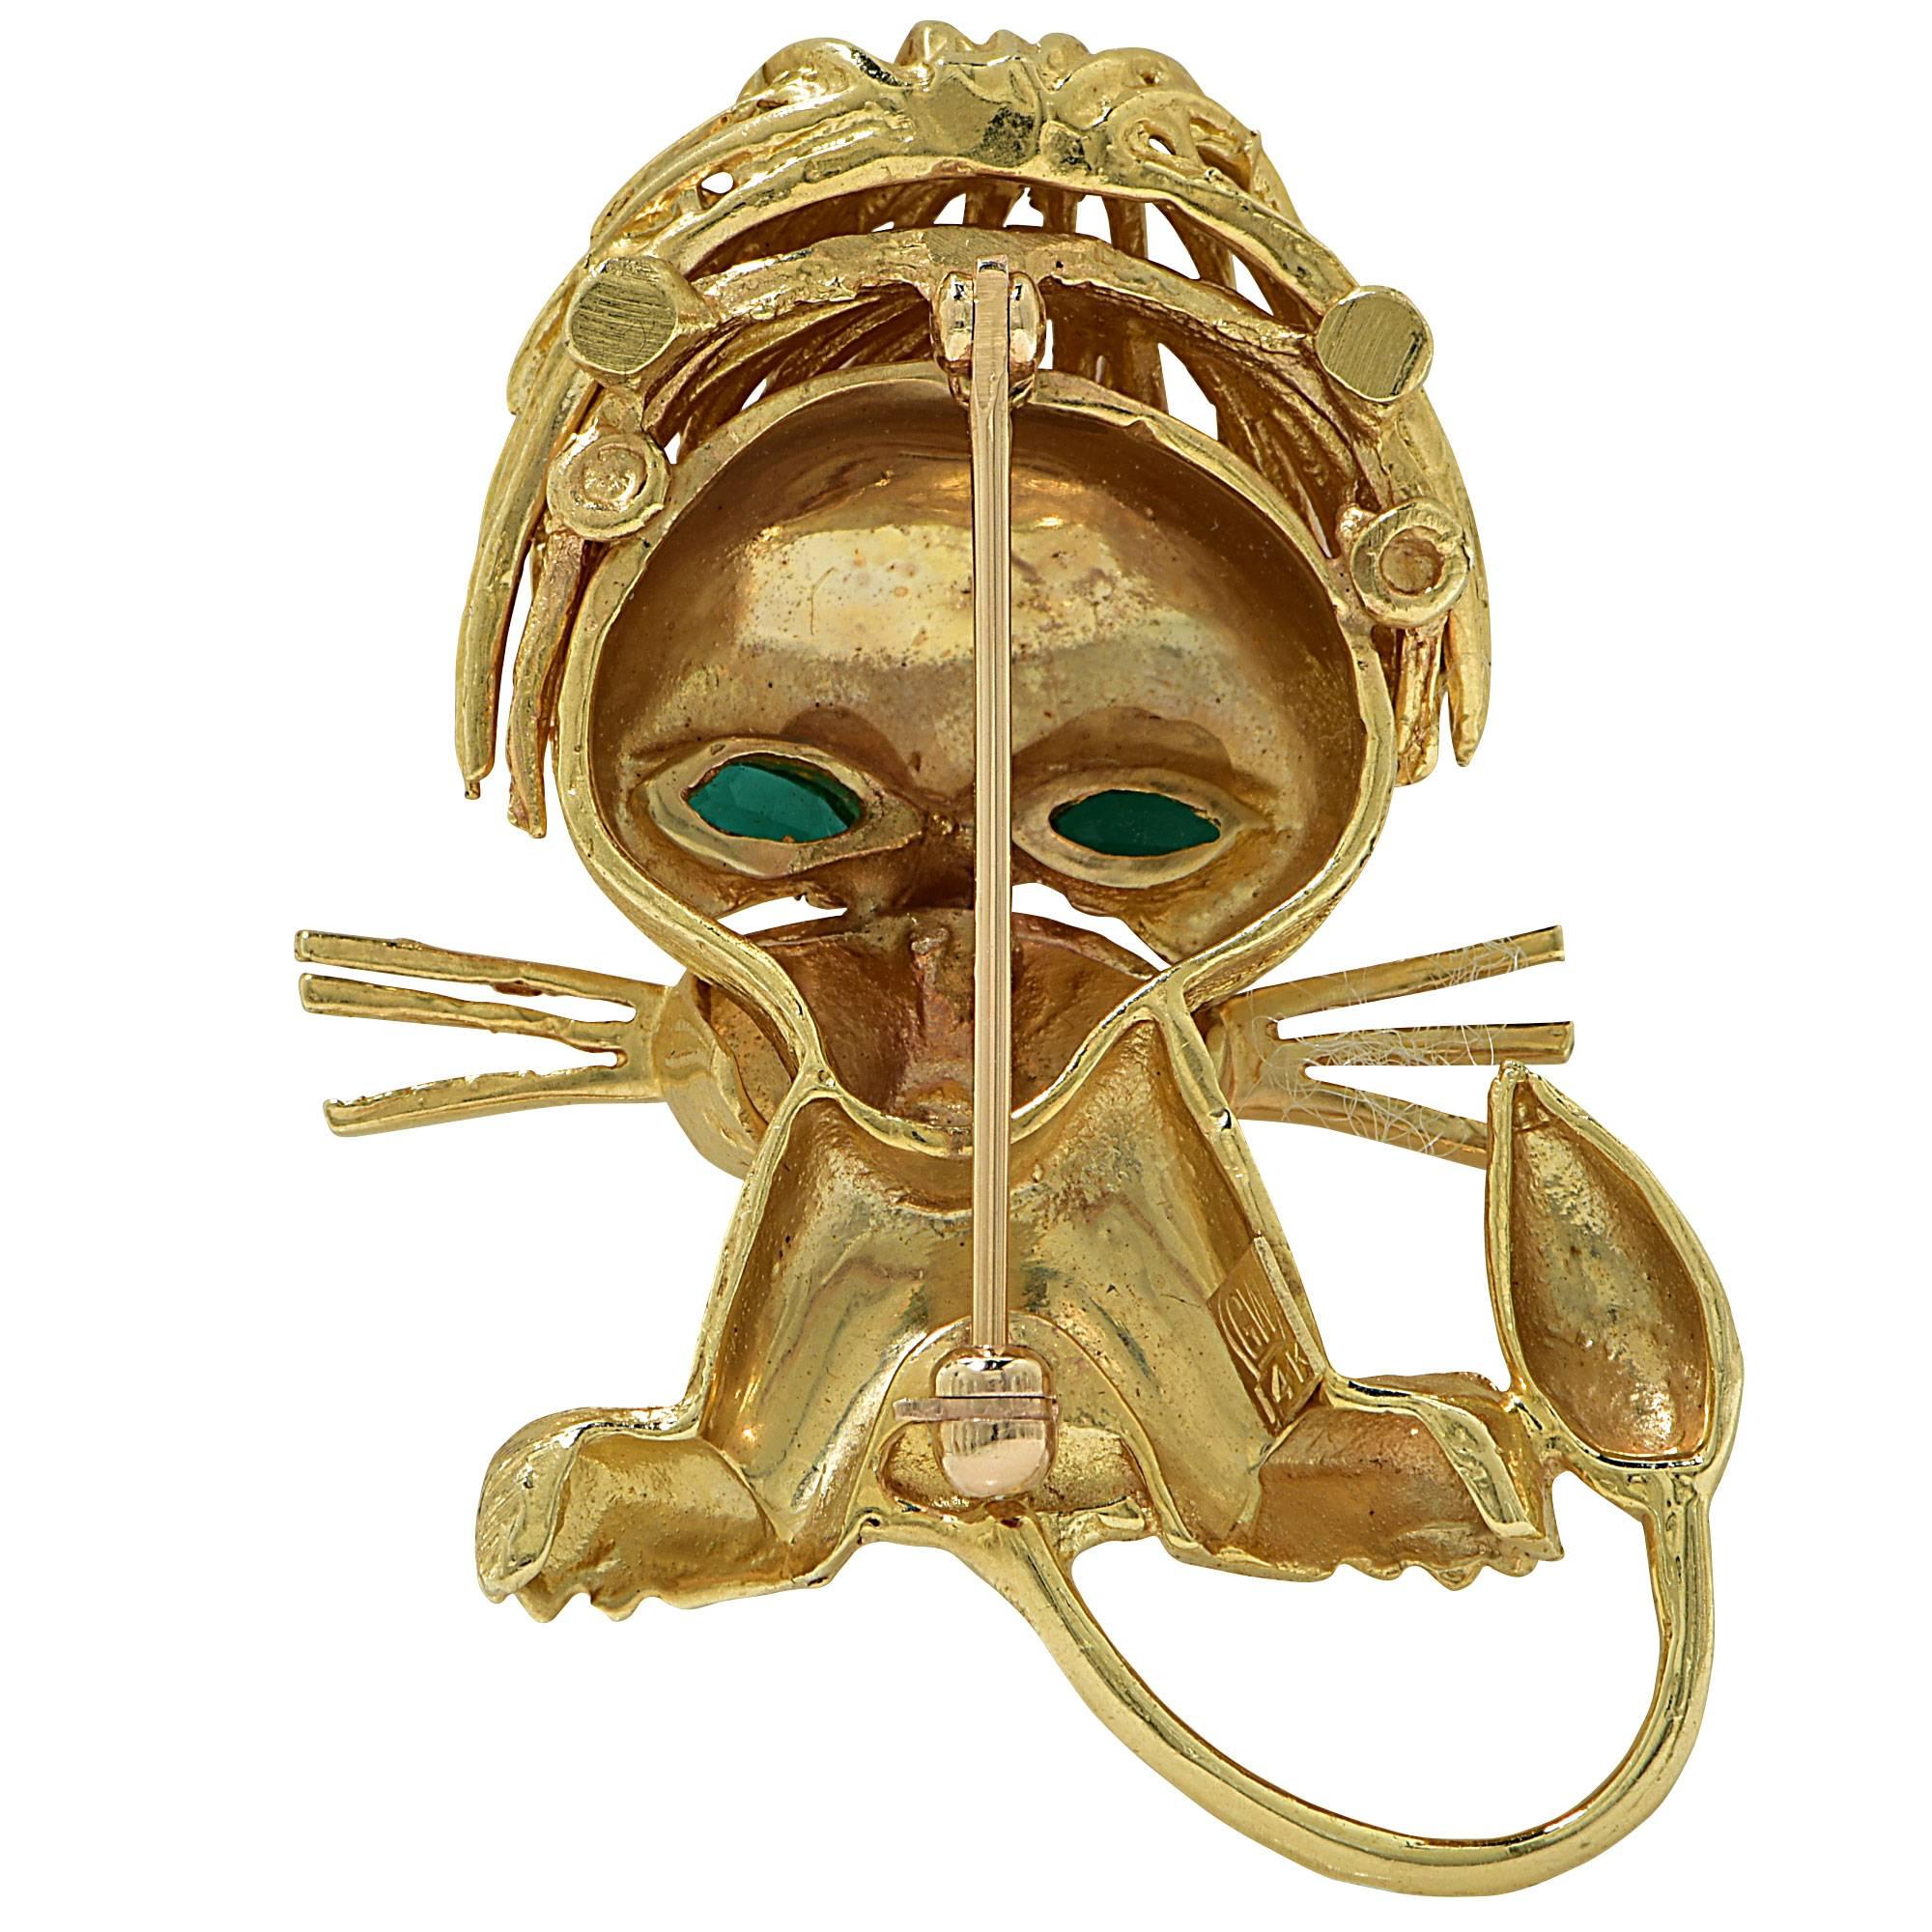 14k yellow gold Lion brooch featuring synthetic emerald and synthetic ruby eyes and nose.

It is stamped and tested as 14k gold.
The metal weight is 14.77 grams.

This brooch is accompanied by a retail appraisal performed by a GIA Graduate